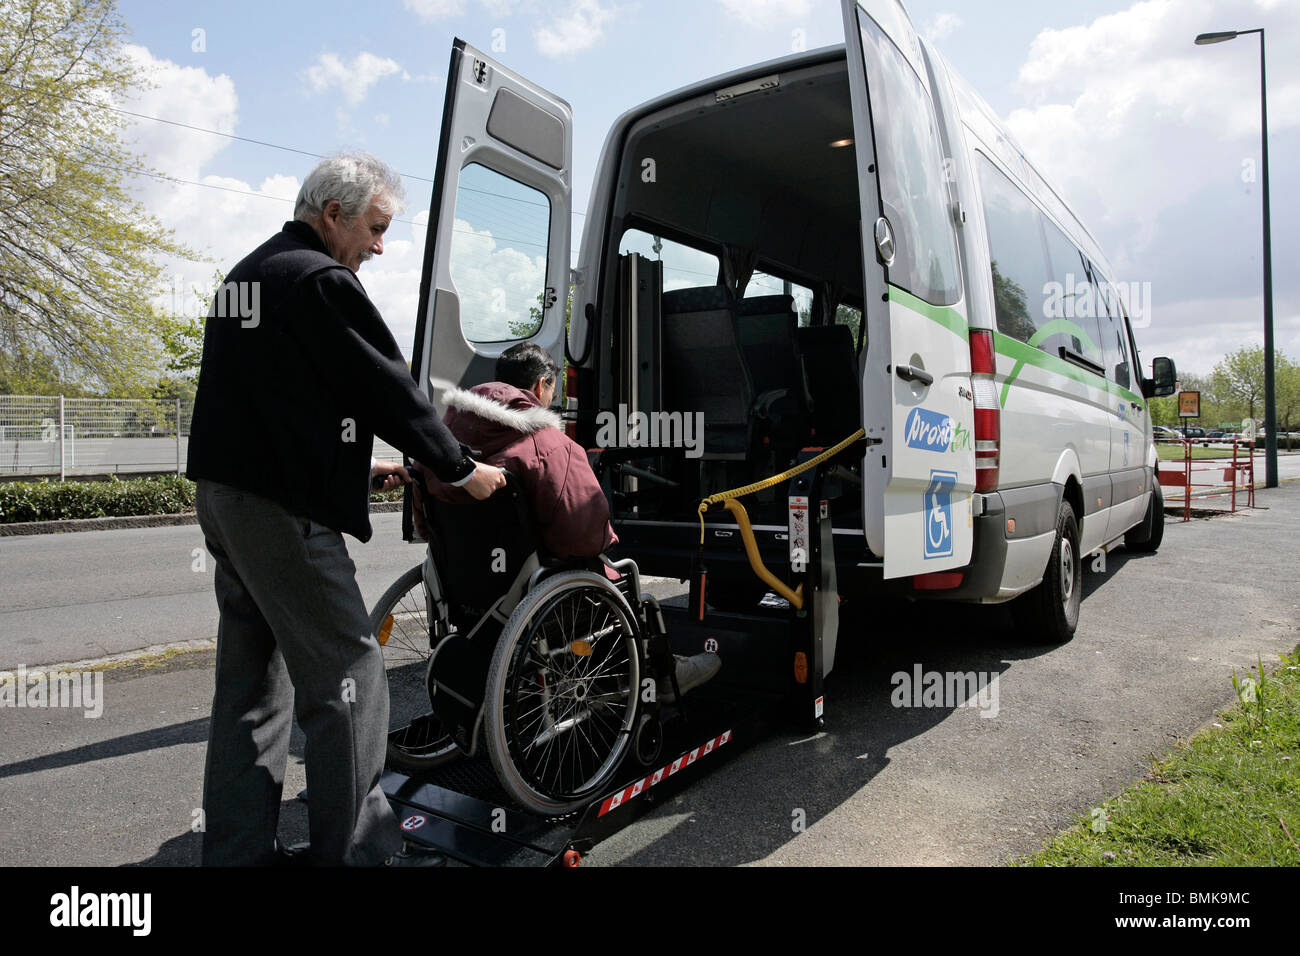 Public transport and disability Stock Photo